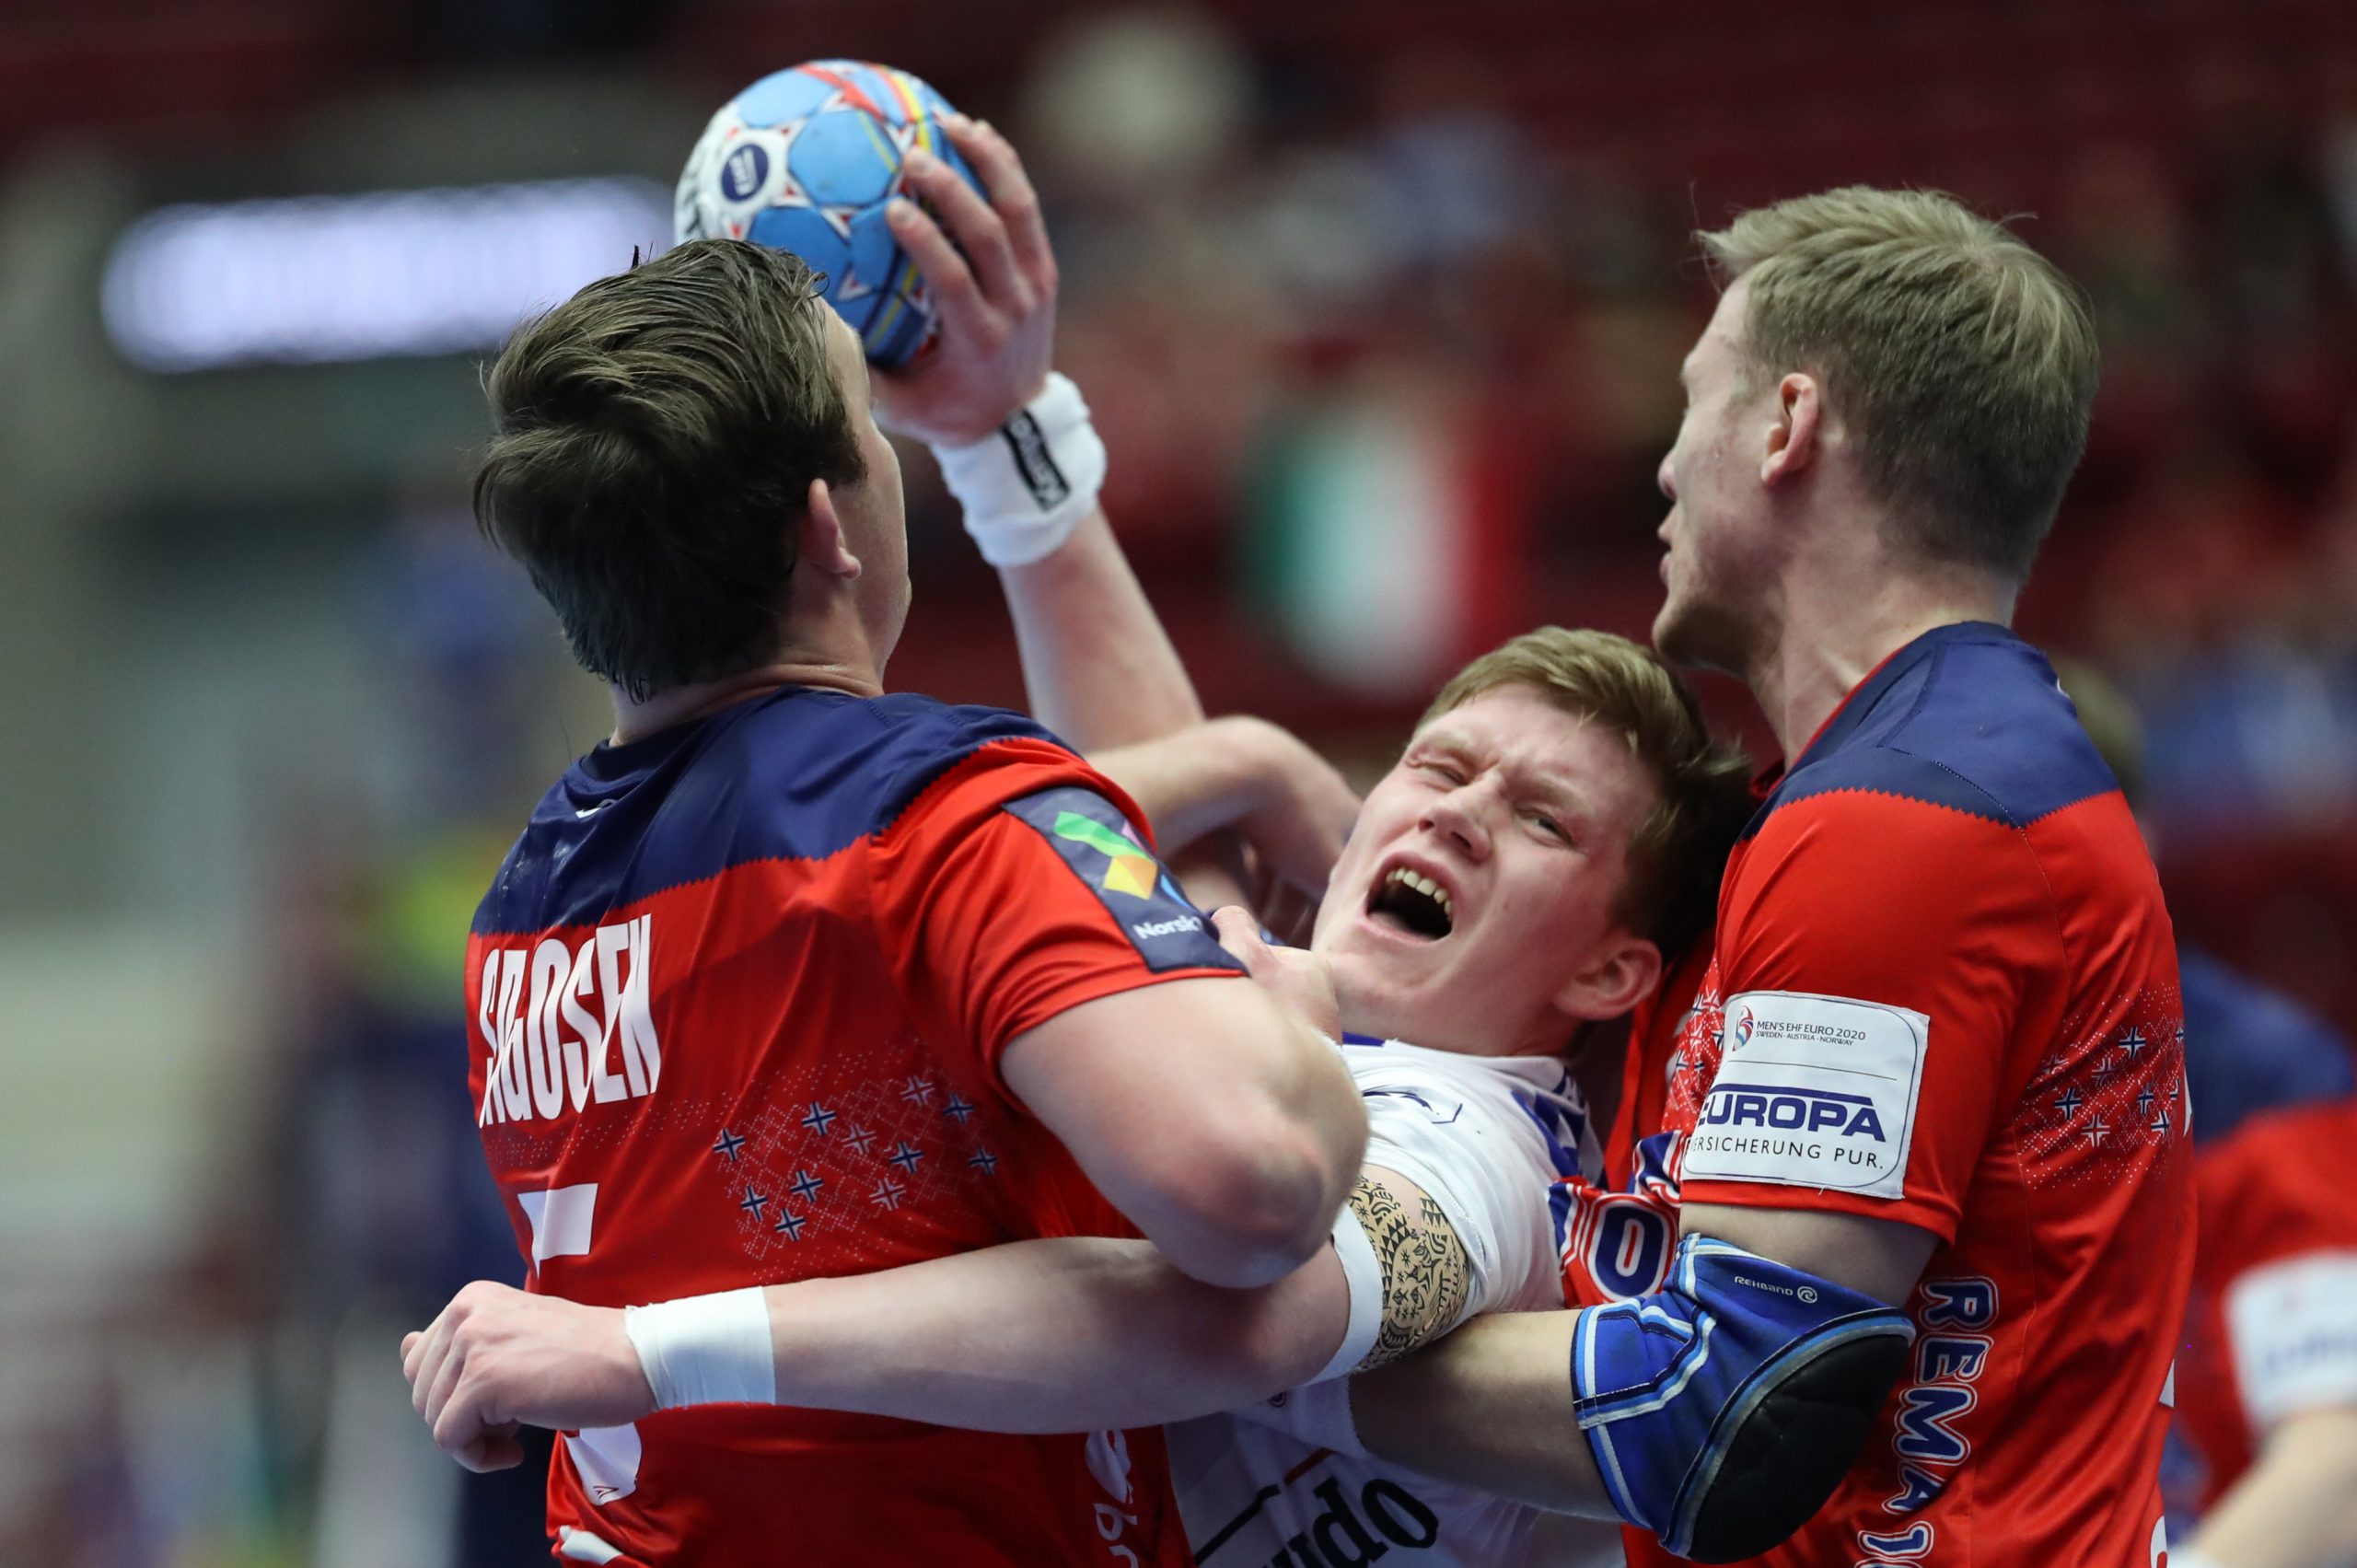 epa08148251 Iceland's Ymir Orn Gislason stoped by Norway's Sander Sagosen (L) and Magnus Gullerud (R) in action during the Men's European Handball Championship main round Group 2 match between Norway and Iceland at Malmo Arena in Malmo, Sweden, 21 January 2020.  EPA/ANDREAS HILLERGREN  SWEDEN OUT